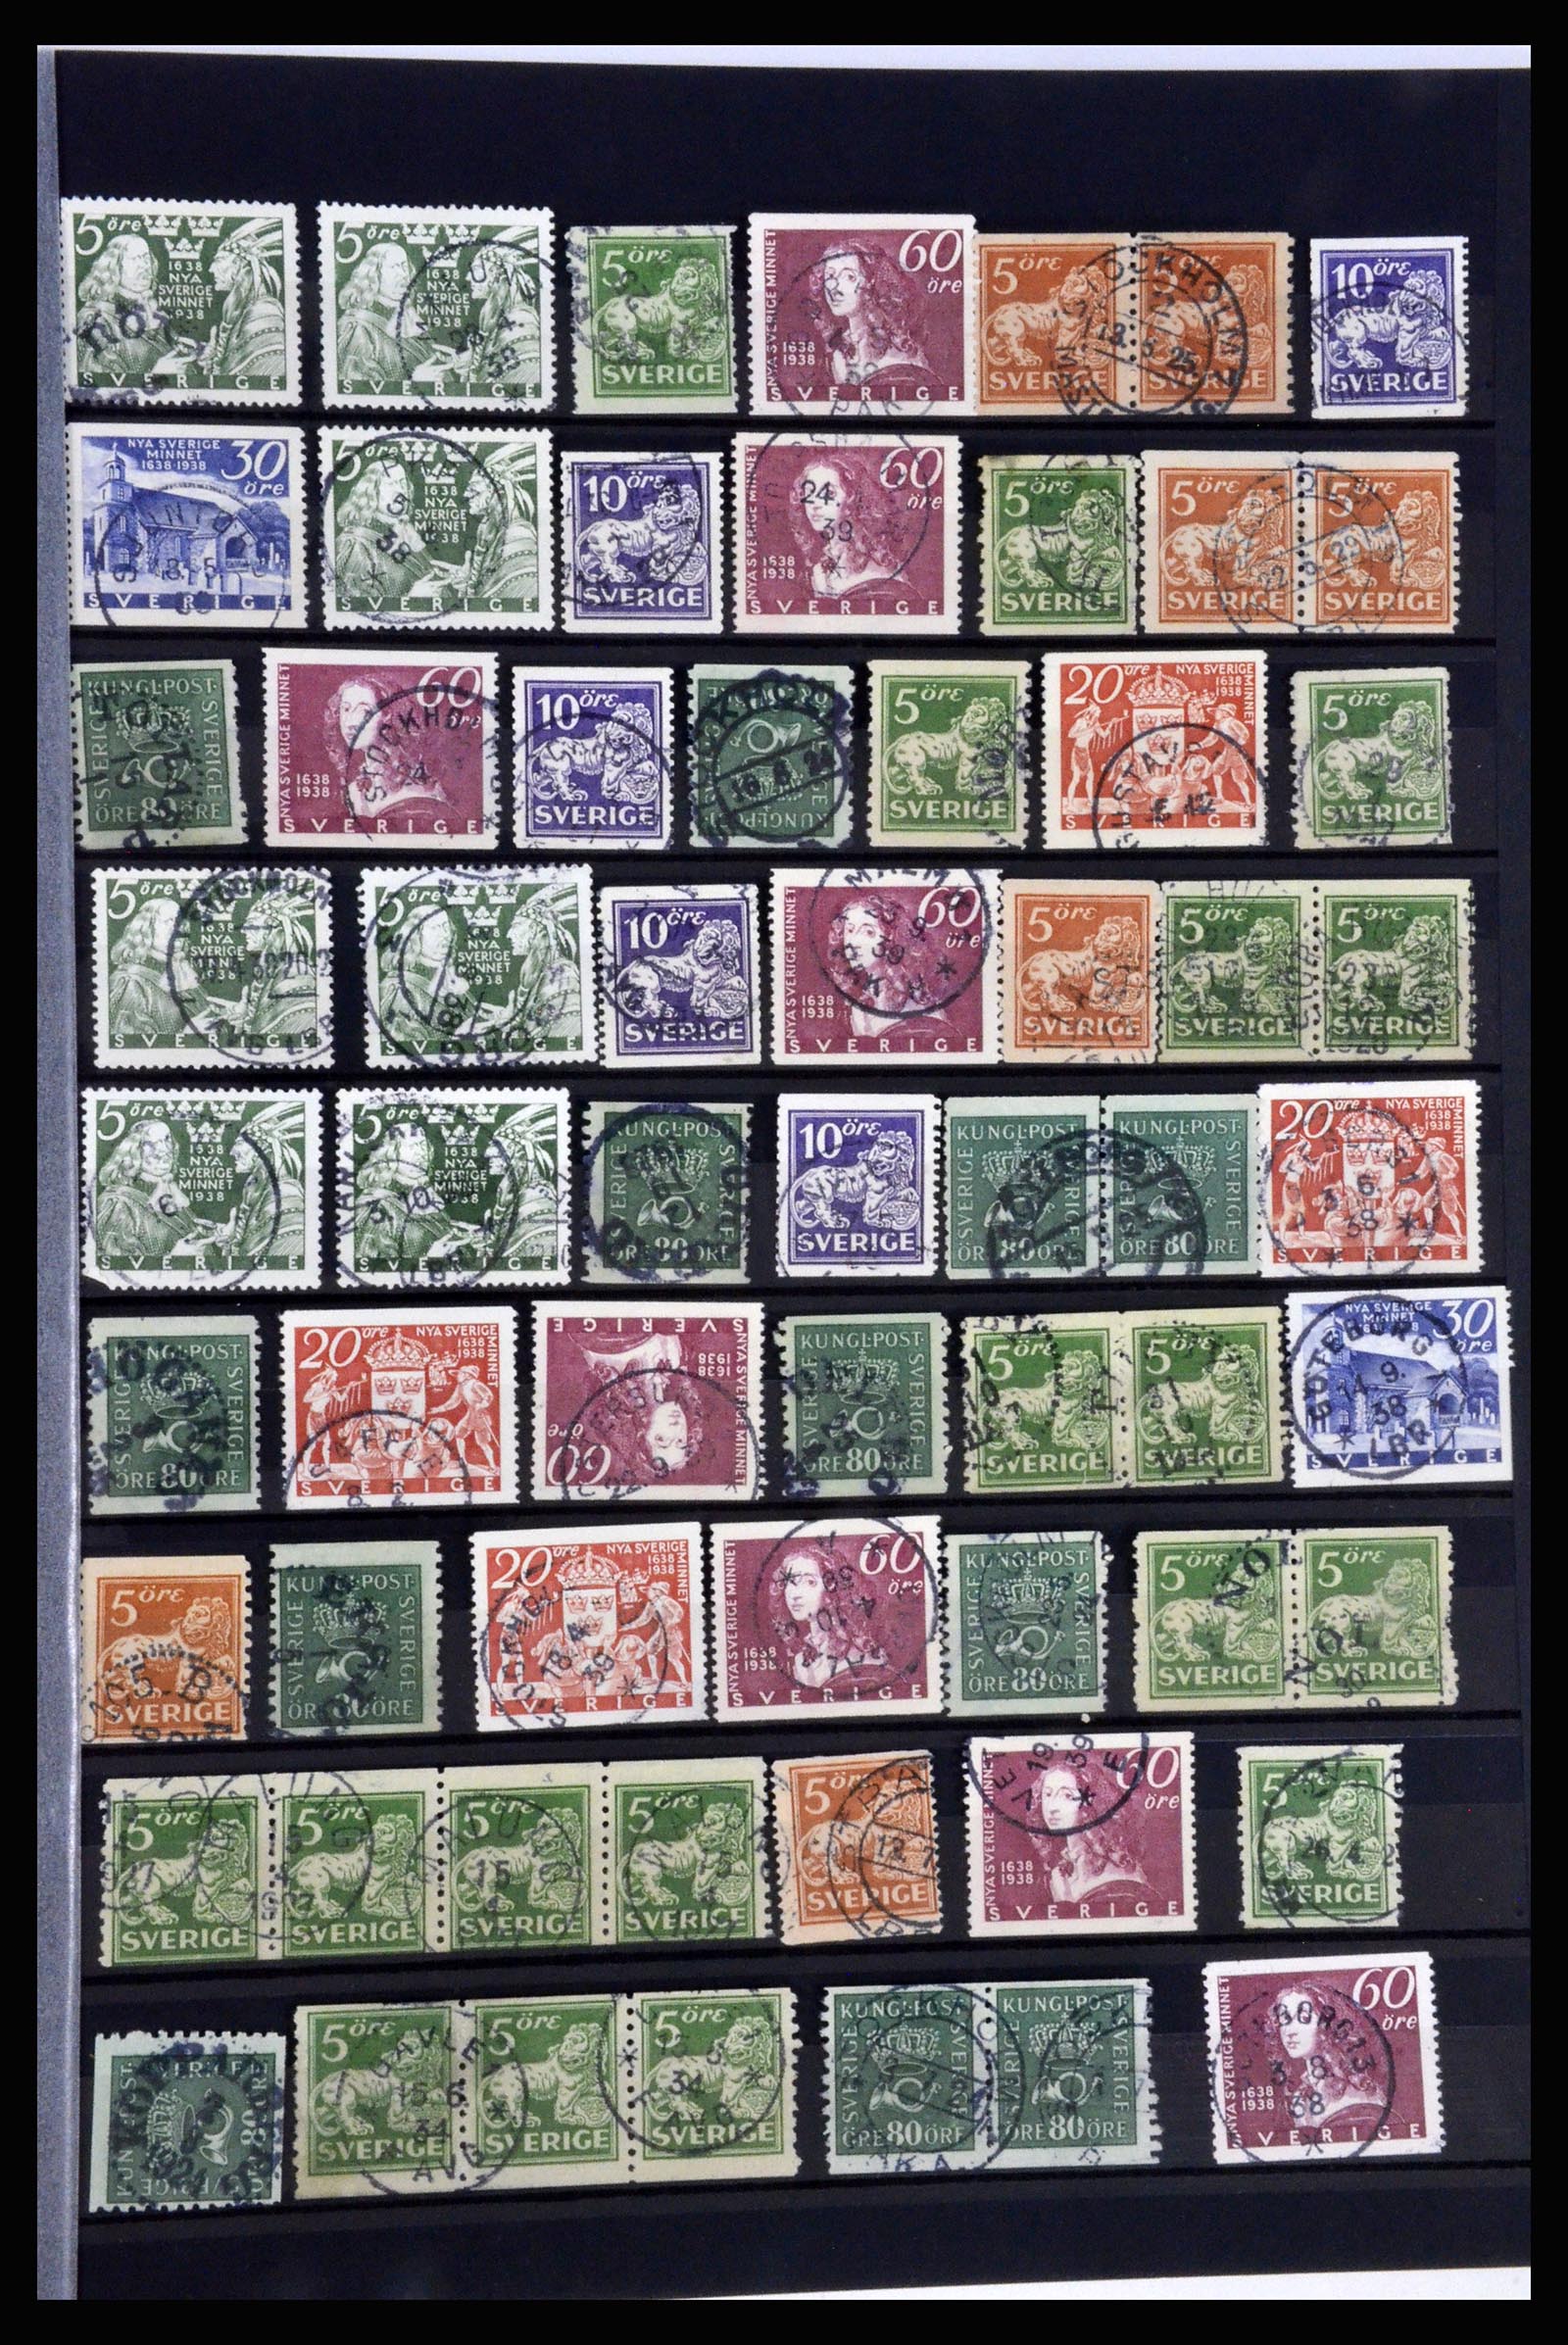 36316 035 - Stamp collection 36316 Sweden cancellations 1920-1938.